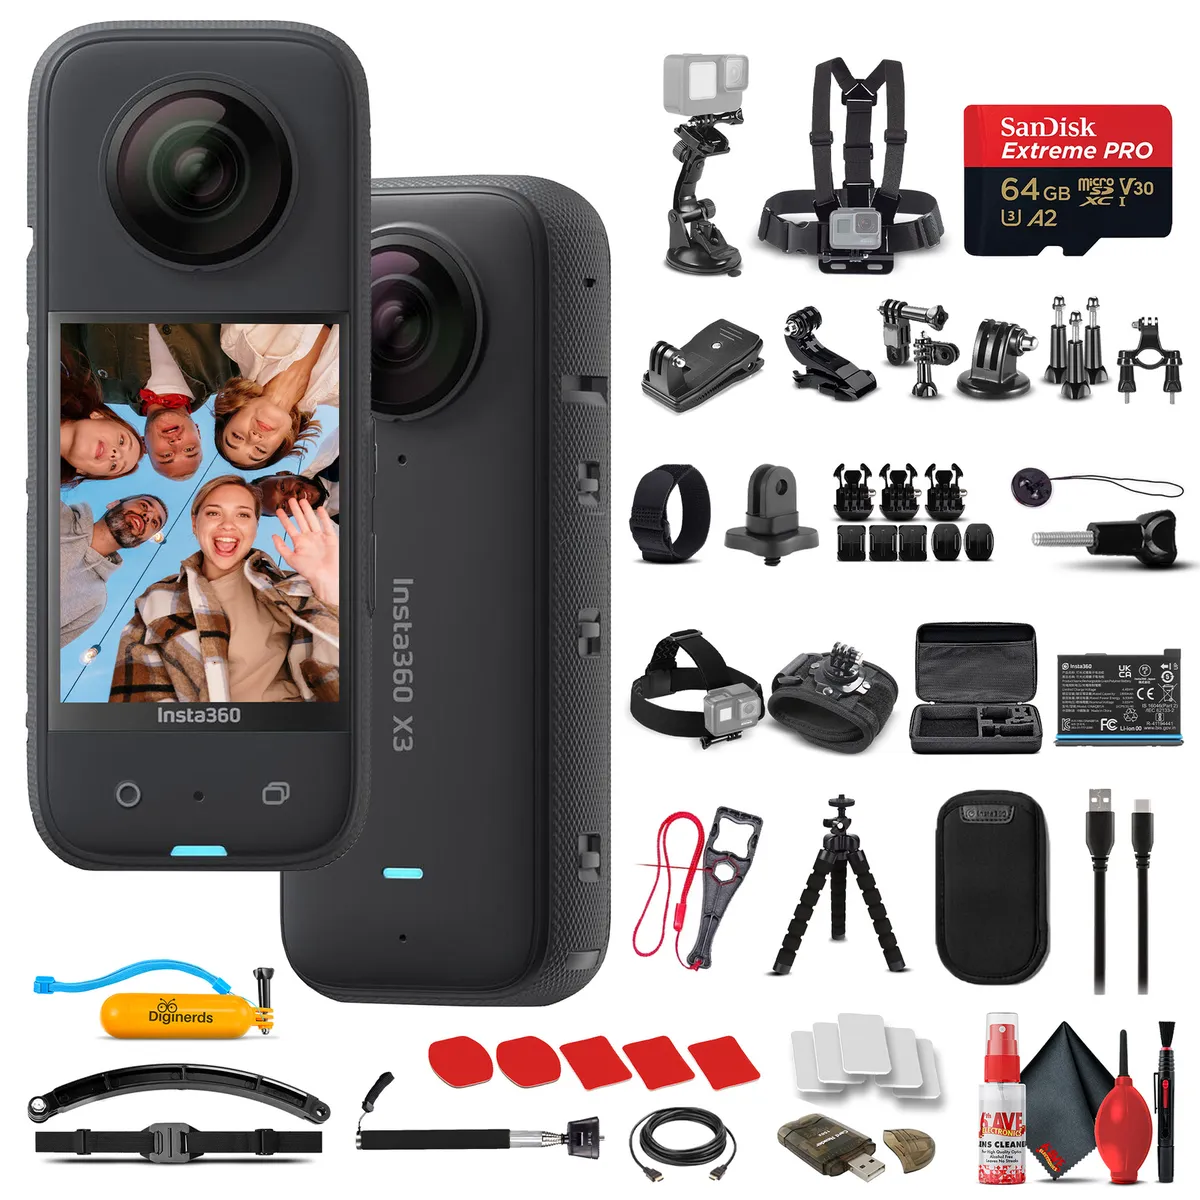 Insta360 X3 Motorcycle Kit (New Version) - Waterproof 360 Action Camera  with 1/2 48MP Sensors, 5.7K 360 Active HDR Video, 72MP 360 Photo, 4K